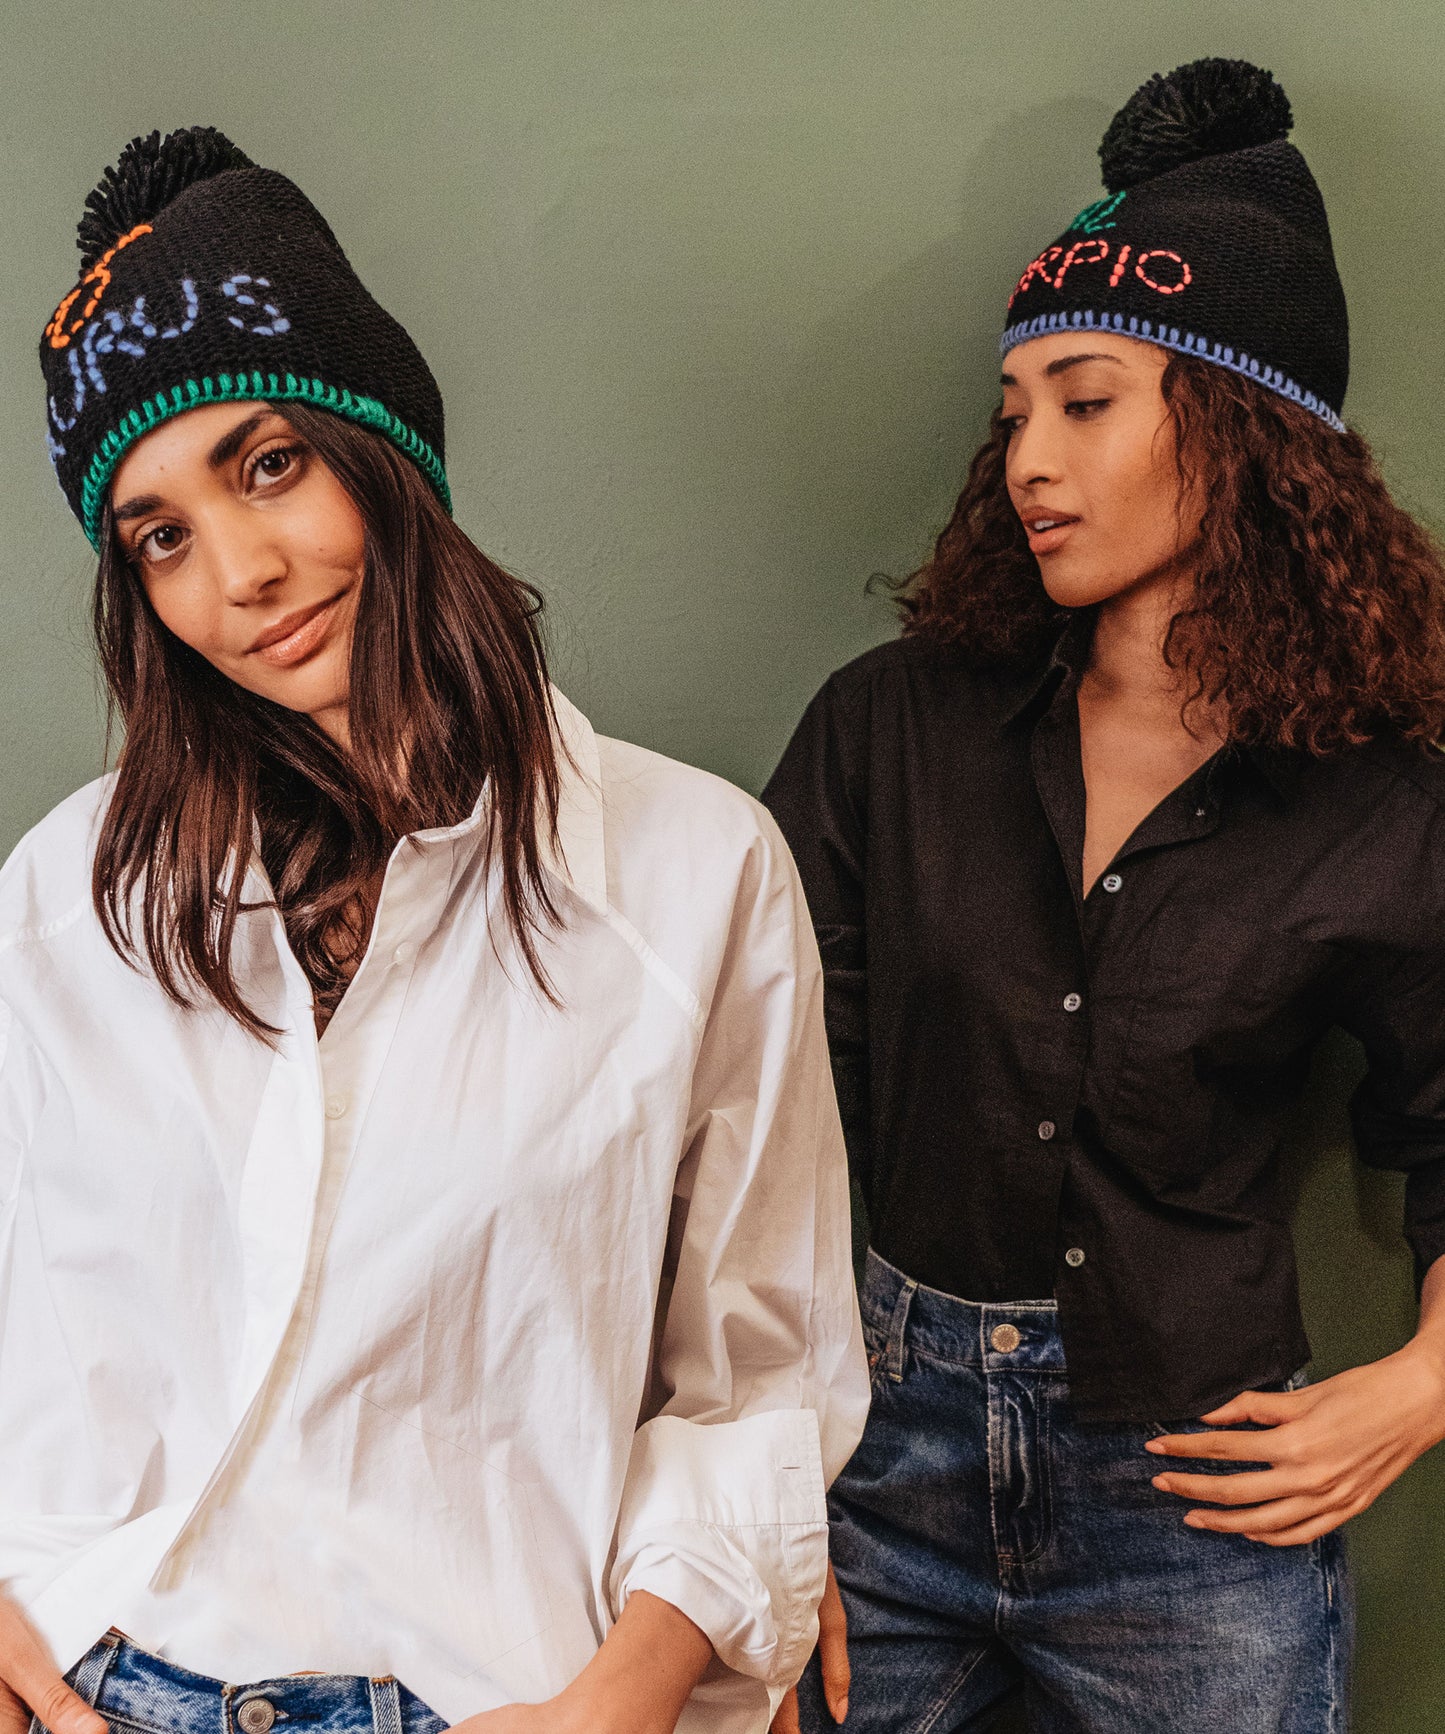 Two models in horoscope beanies. One is Taurus and one is Scorpio.